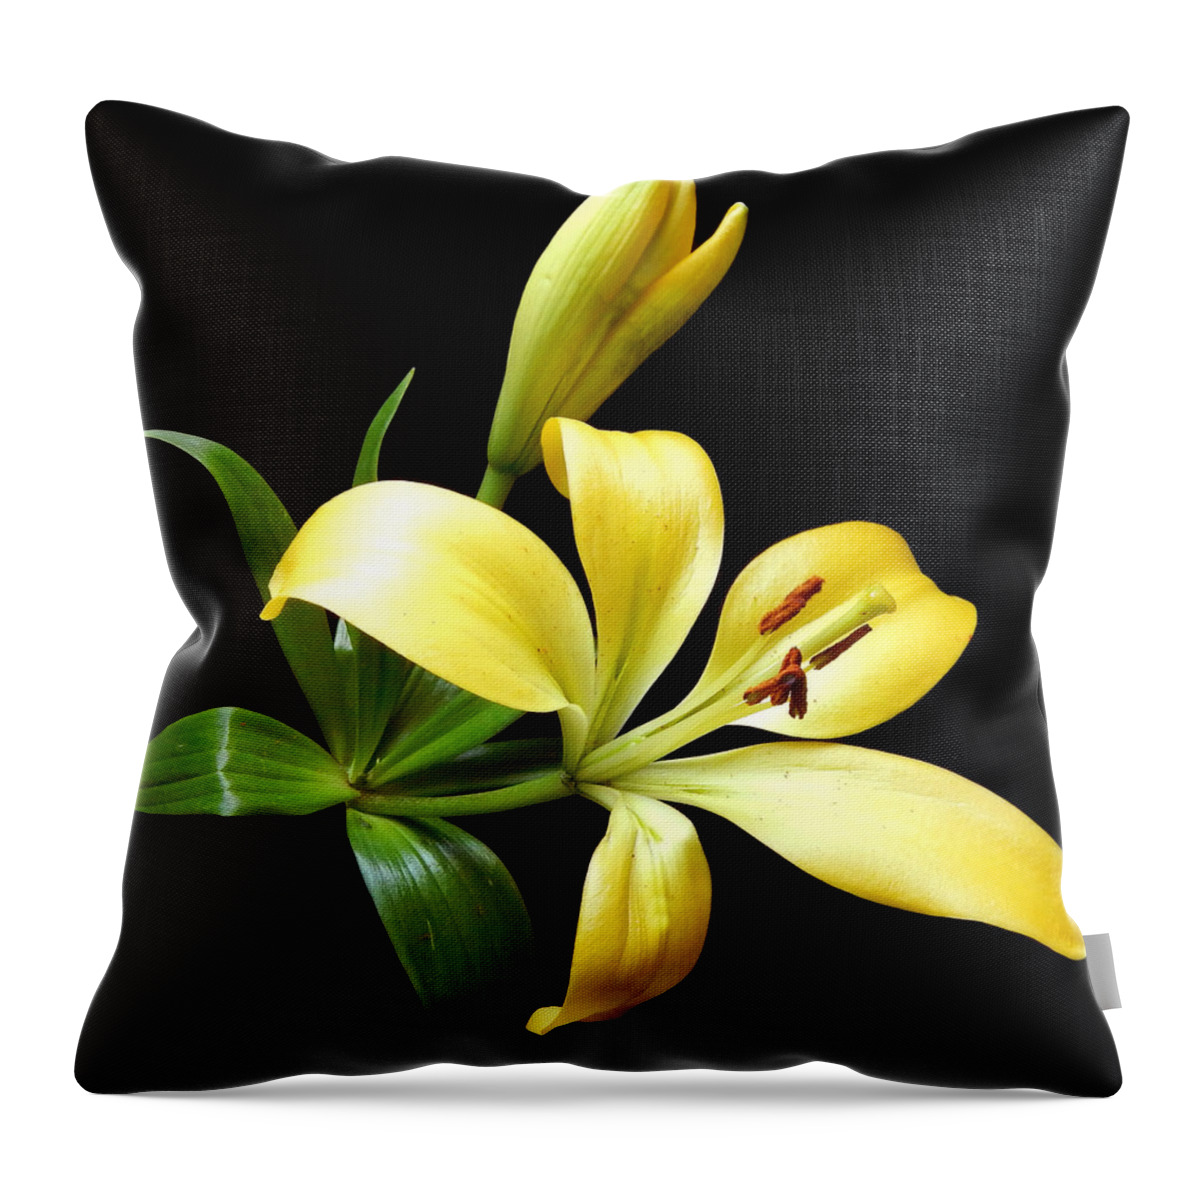 Flowers Throw Pillow featuring the photograph Yellow Lily I Still Life Flower Art Poster by Lily Malor